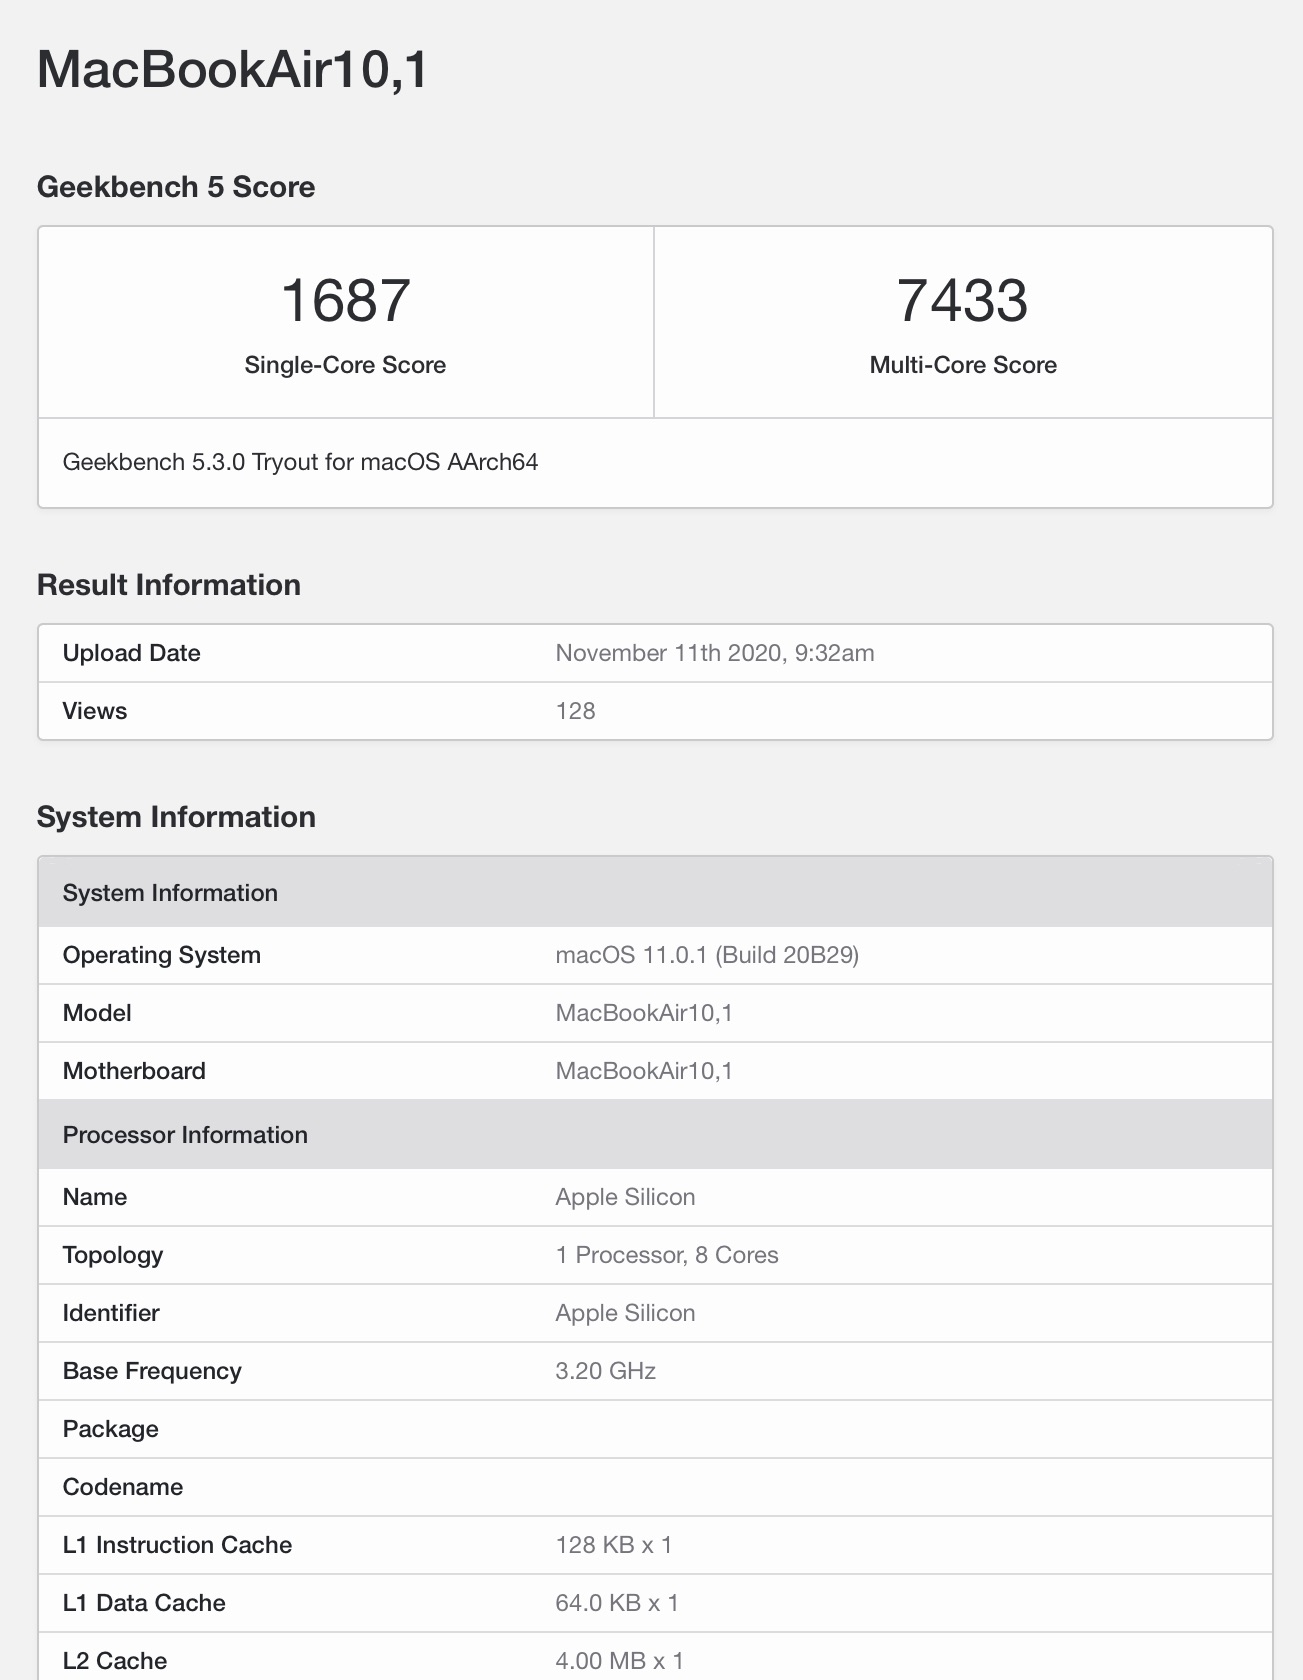 Apple Silicon M1 Chip in MacBook Air Outperforms High-End 16-Inch MacBook Pro | MacRumors Forums